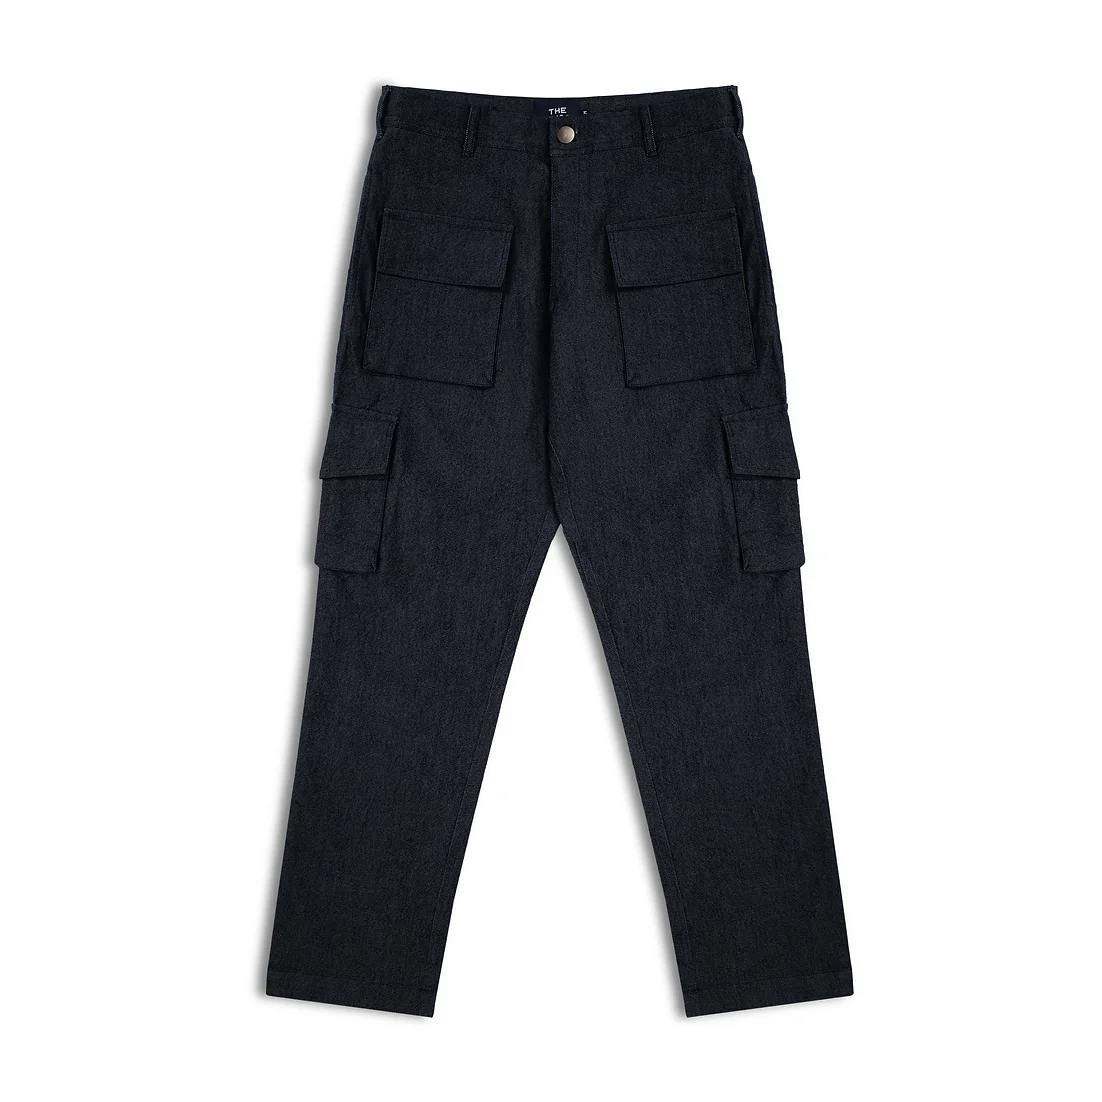 Denim Utility Pants, a product by The Khwaab